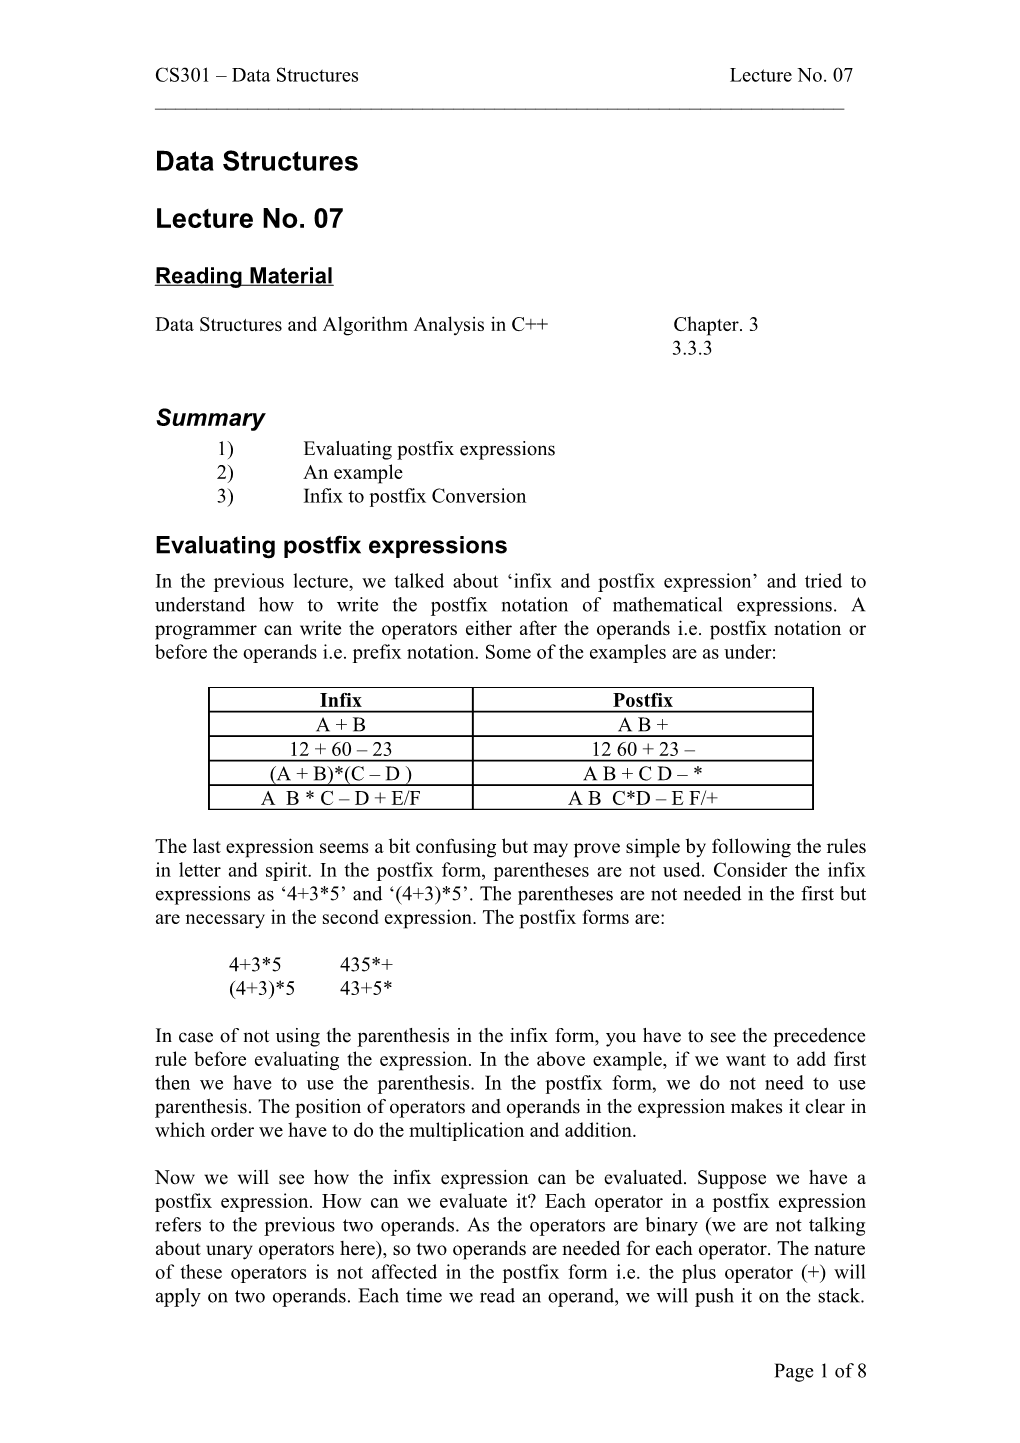 CS301 Data Structures Lecture No. 07